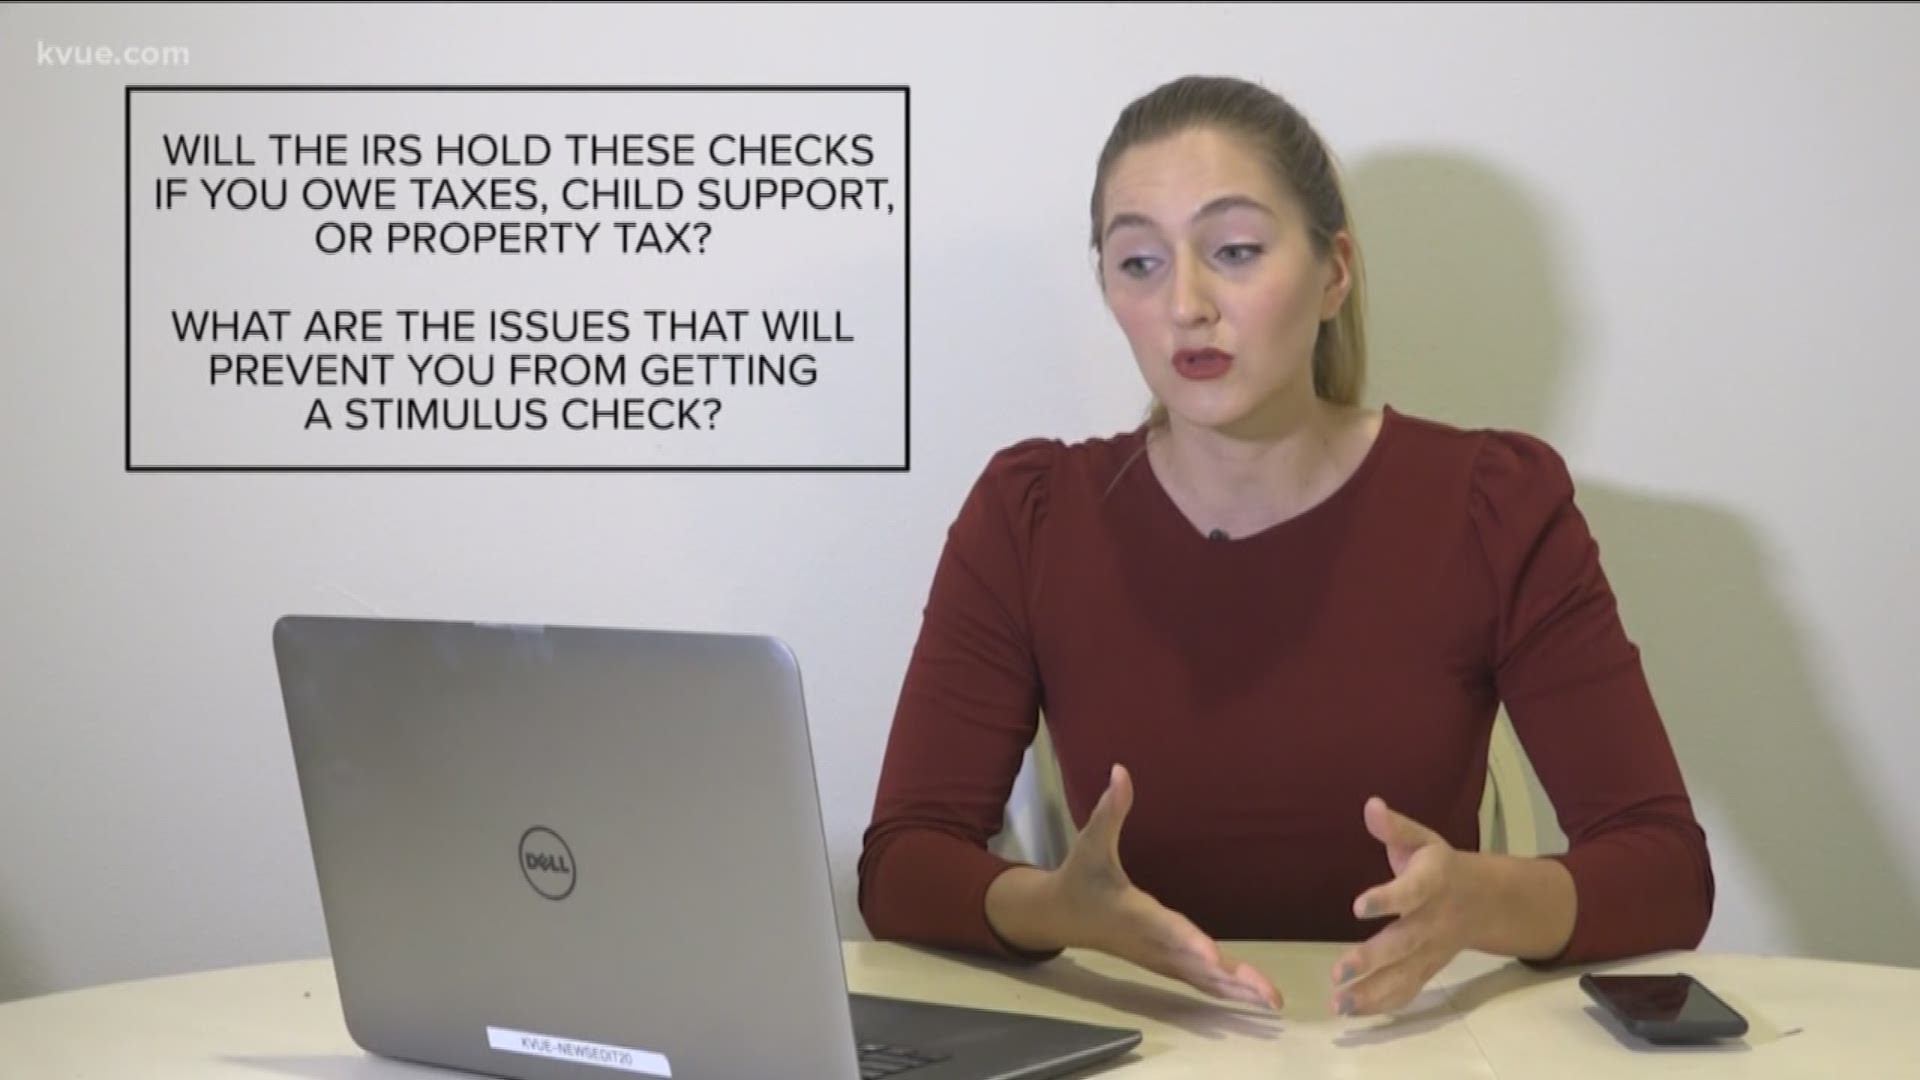 What would prevent you from getting a stimulus check? Will the IRS hold these checks if you owe taxes, child support or property taxes?